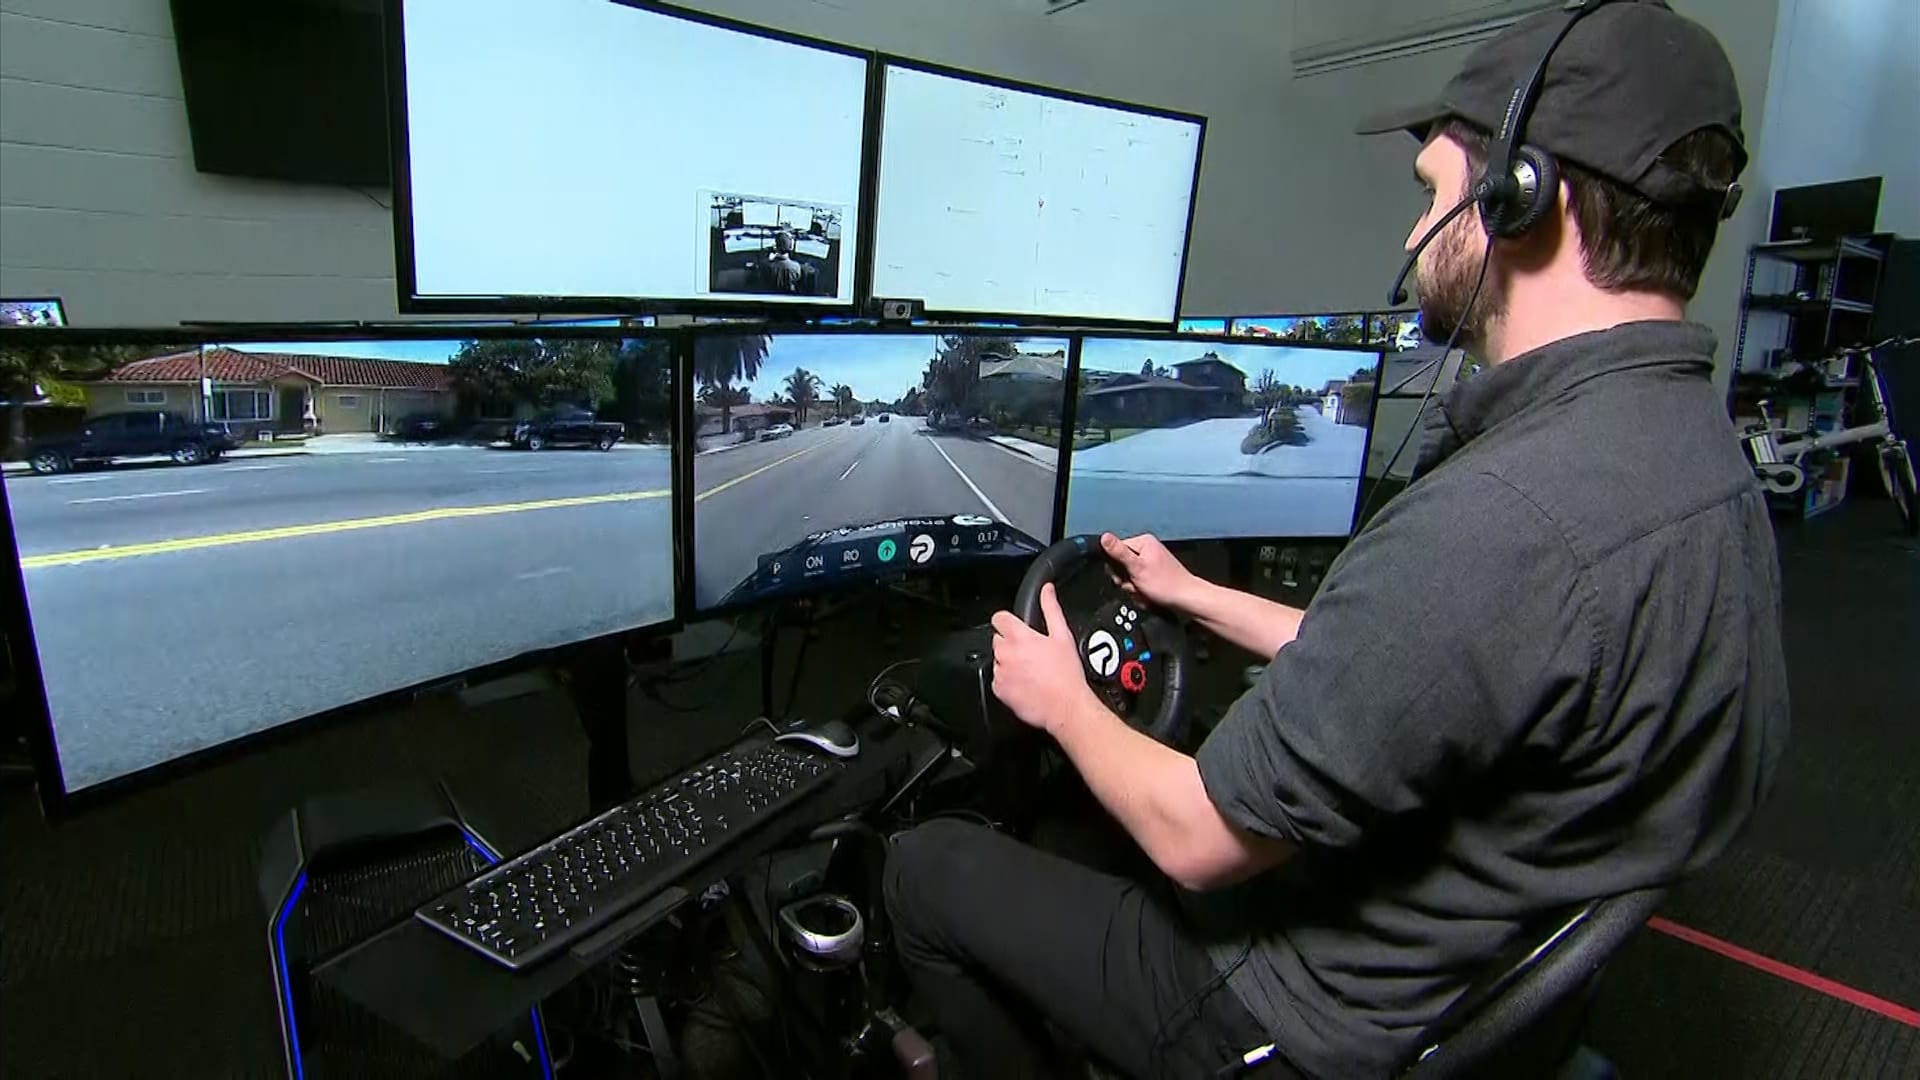 teleoperation of a self-driving car